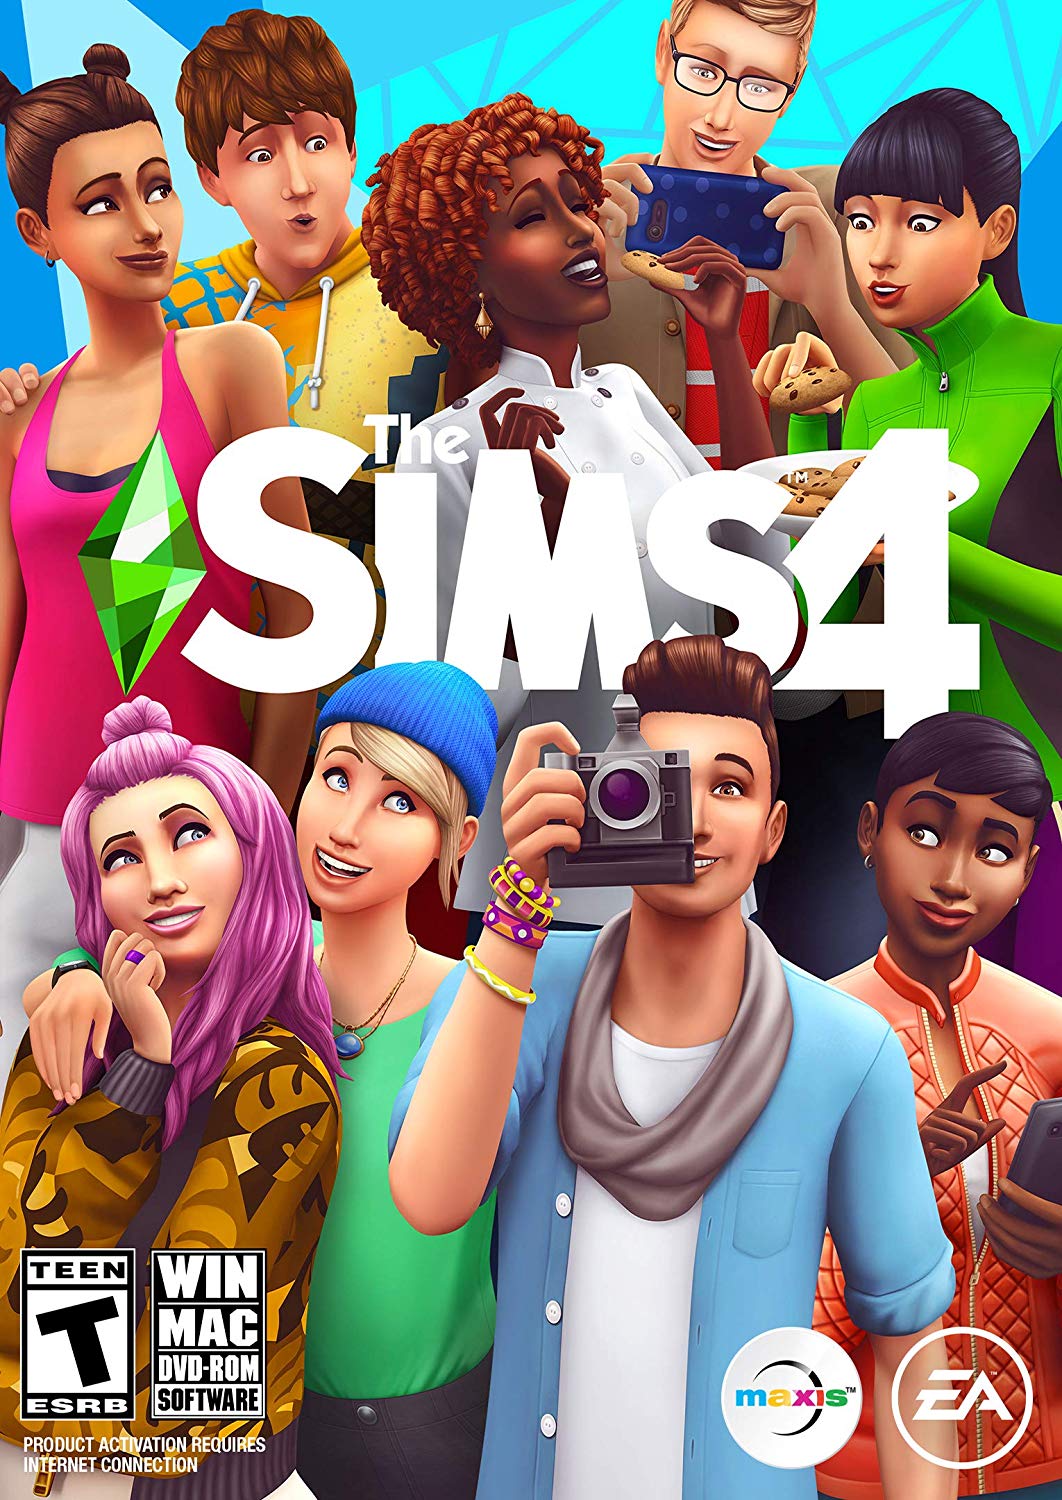 Sims 4, Electronic Arts (Pc) (Digital Download), 1002511 - image 1 of 10